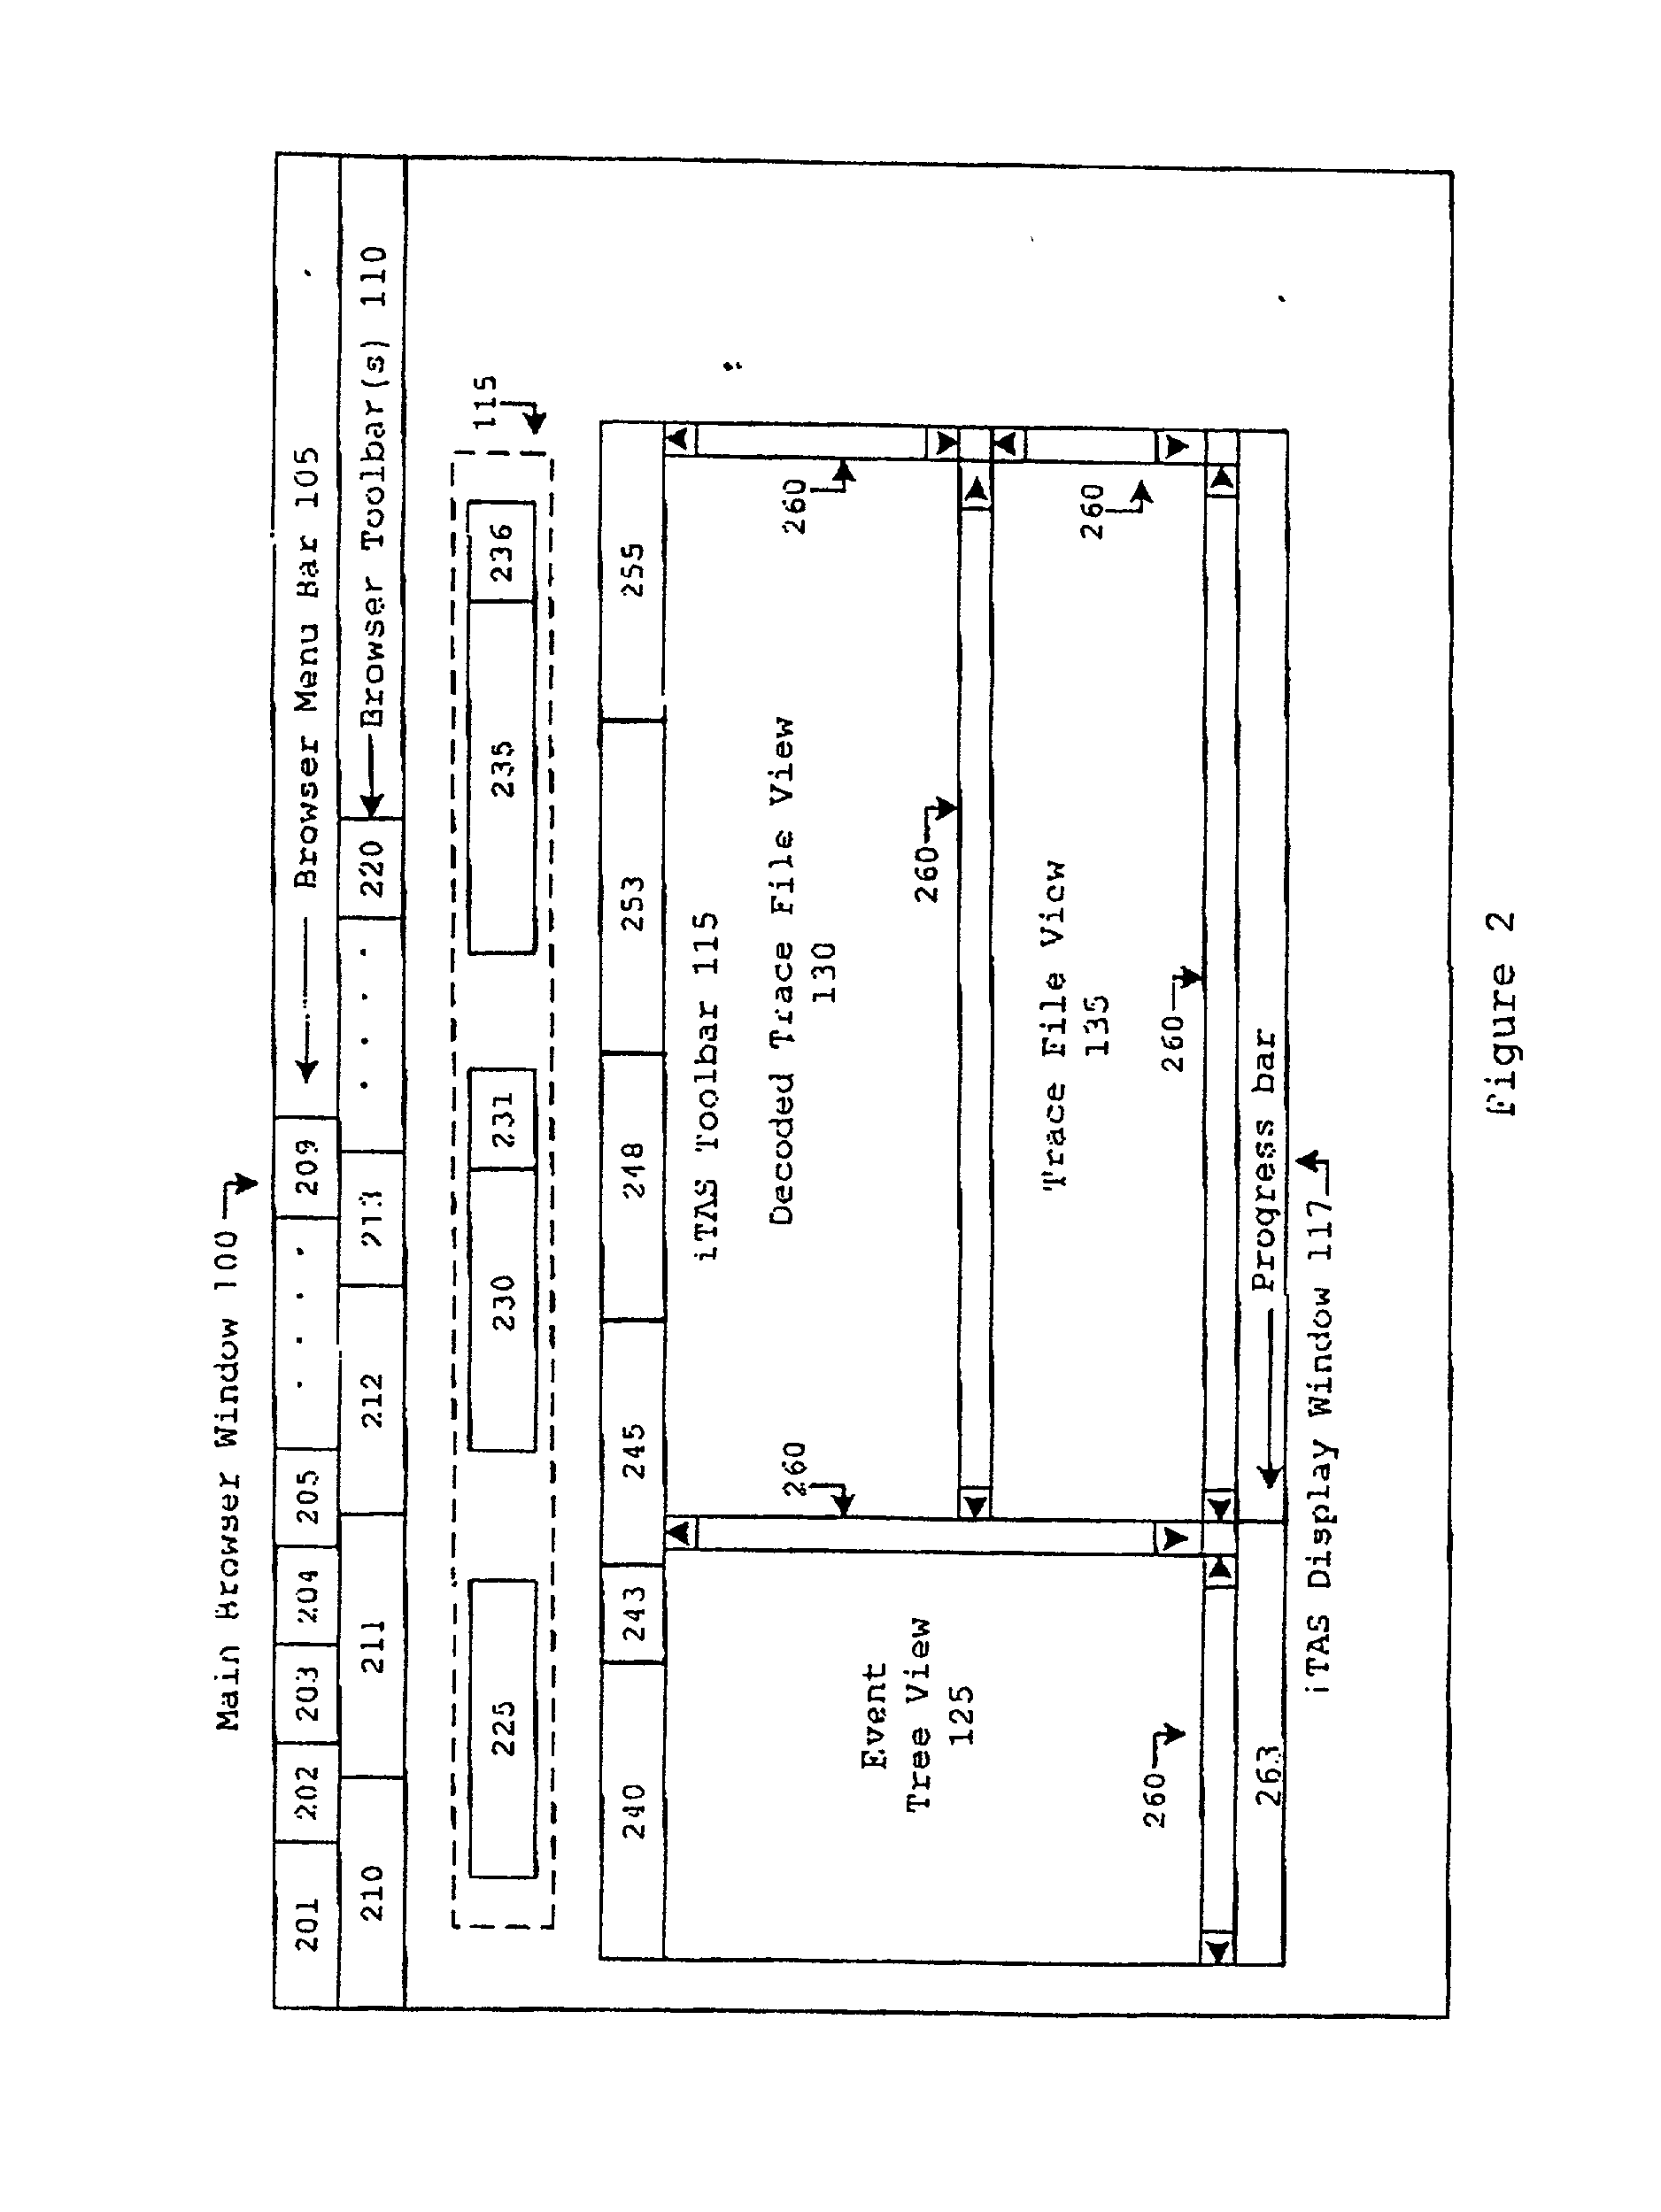 Method and system of displaying telecommunication trace diagnostic information